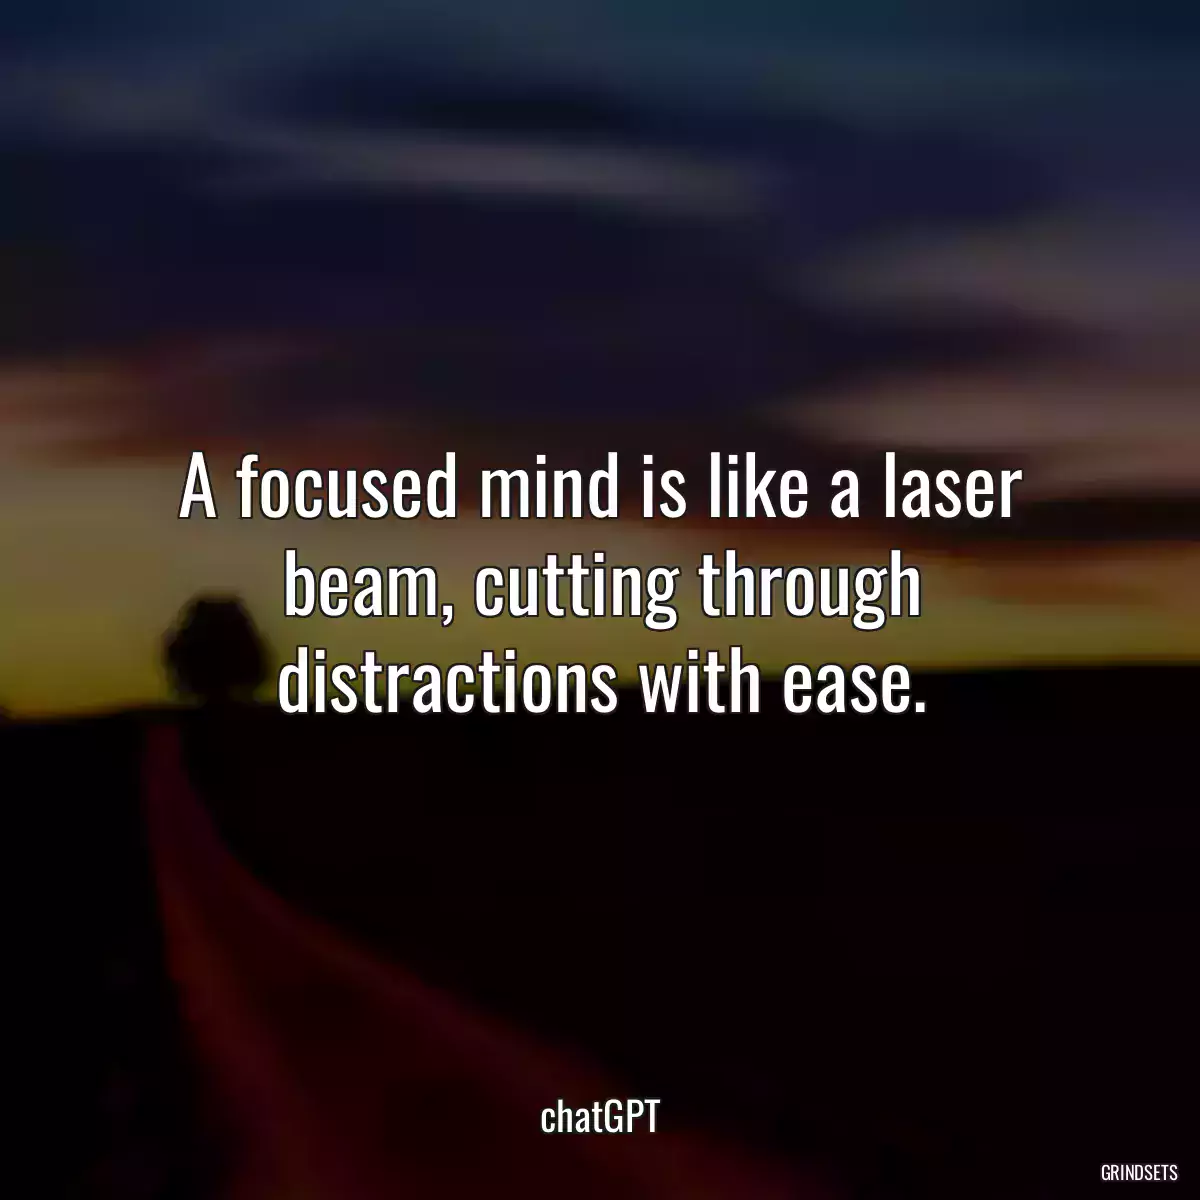 A focused mind is like a laser beam, cutting through distractions with ease.